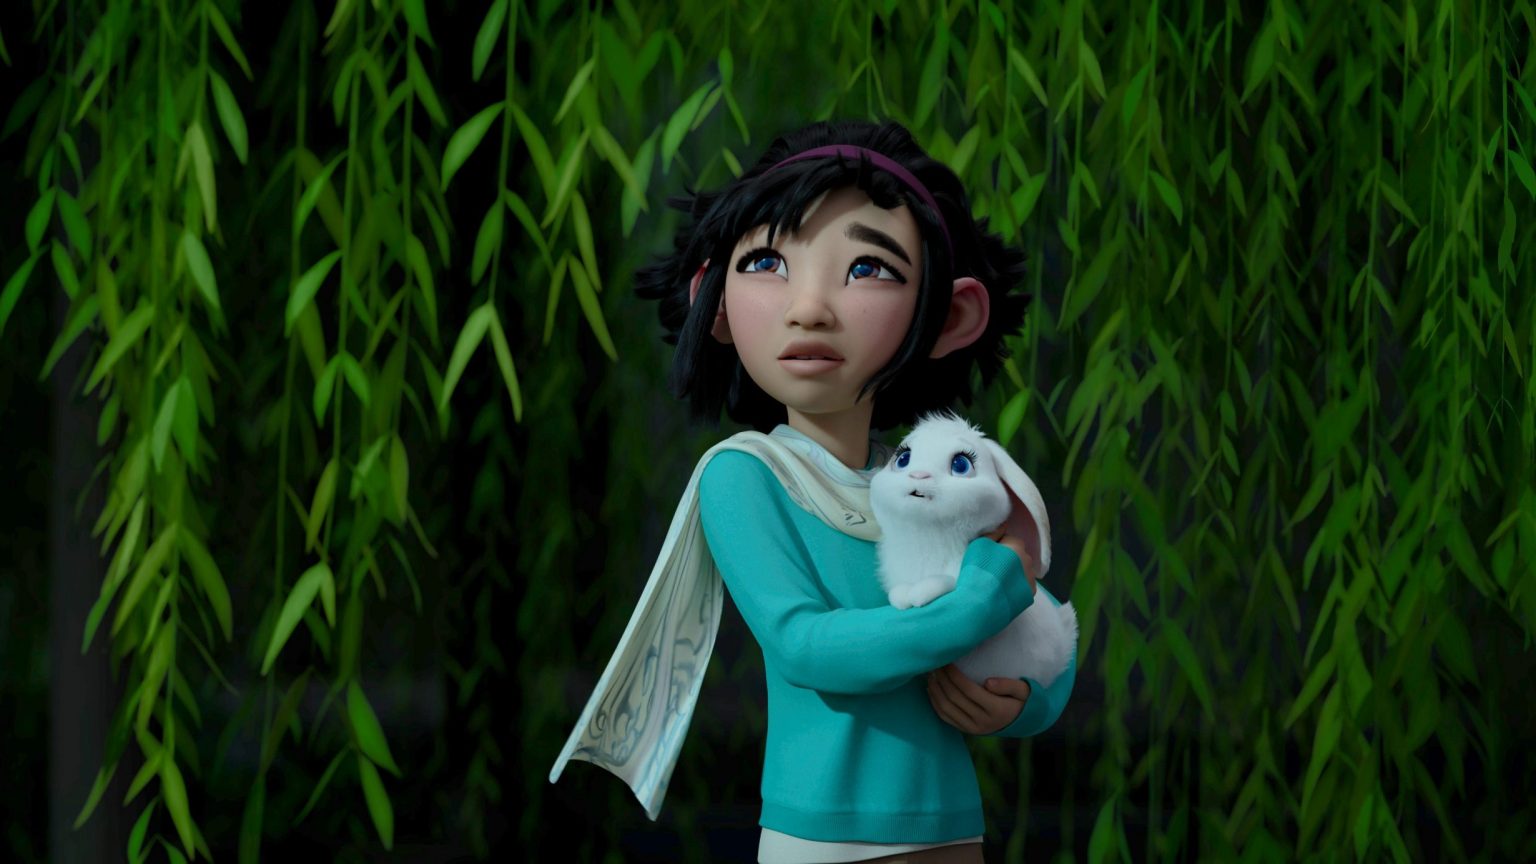 Fei Fei looks up to the sky while holding her pet rabbit in 'Over the Moon.'